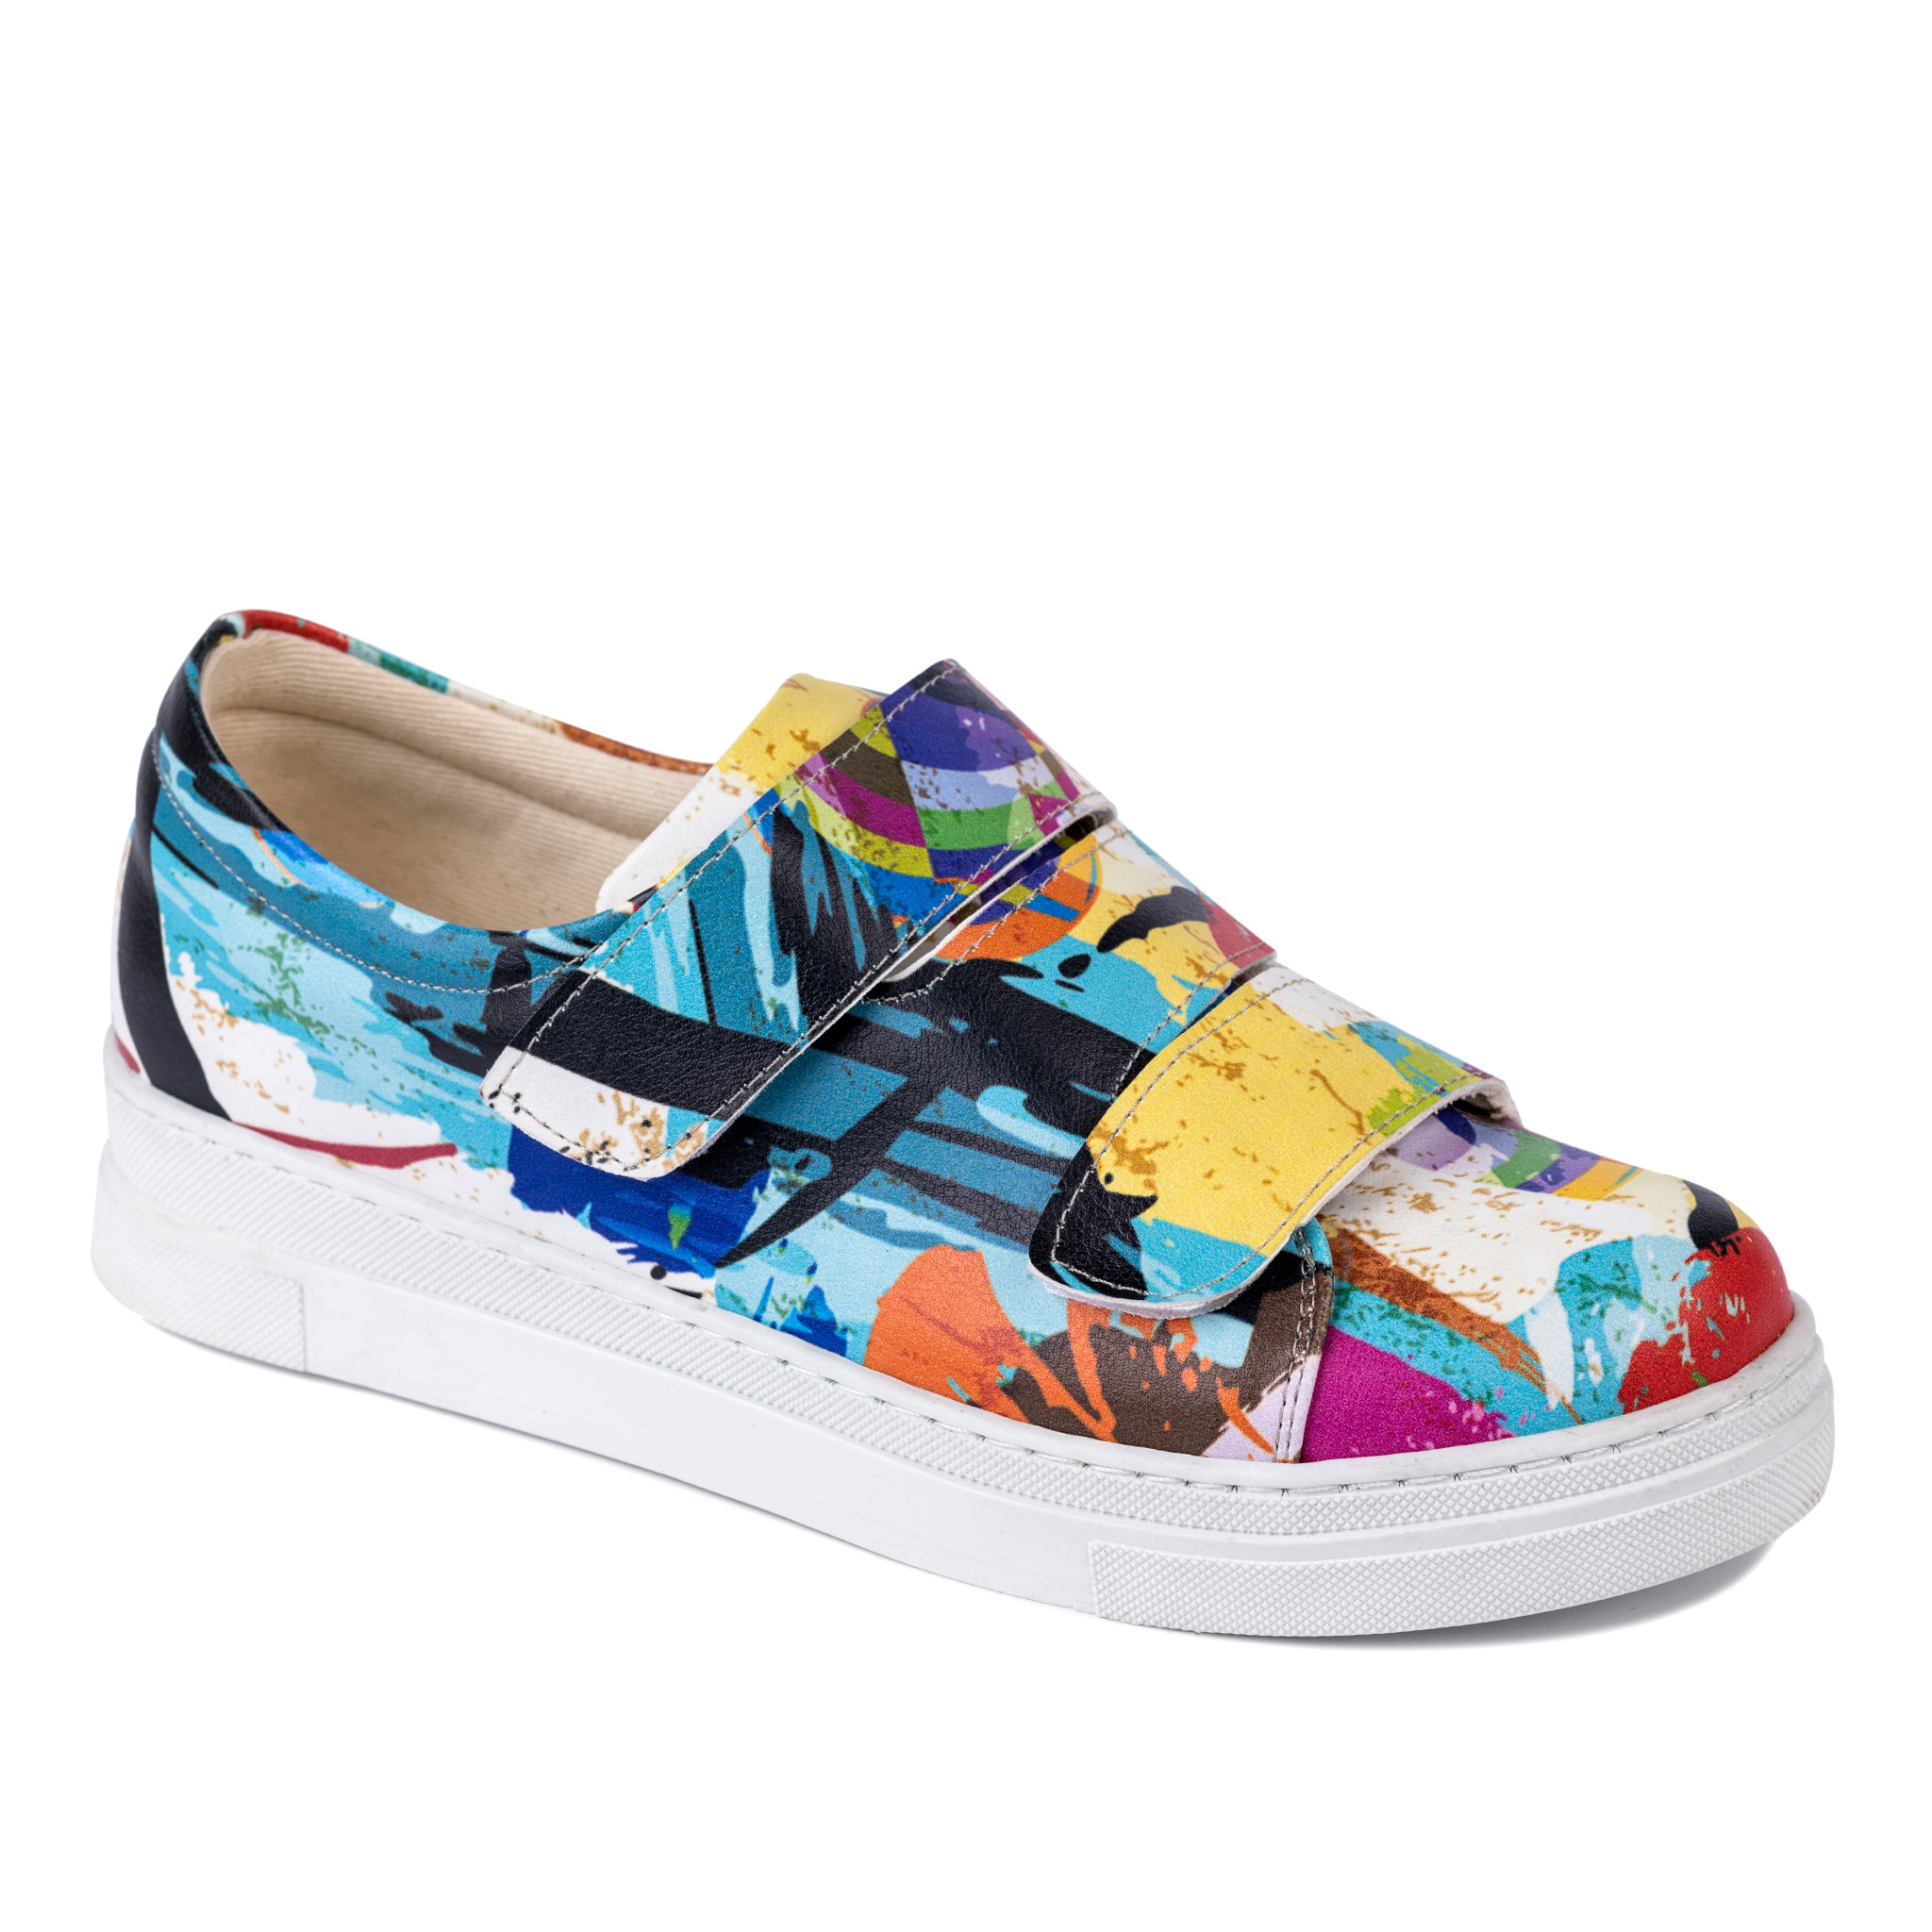 COLORFUL SNEAKERS WITH VELCRO BAND